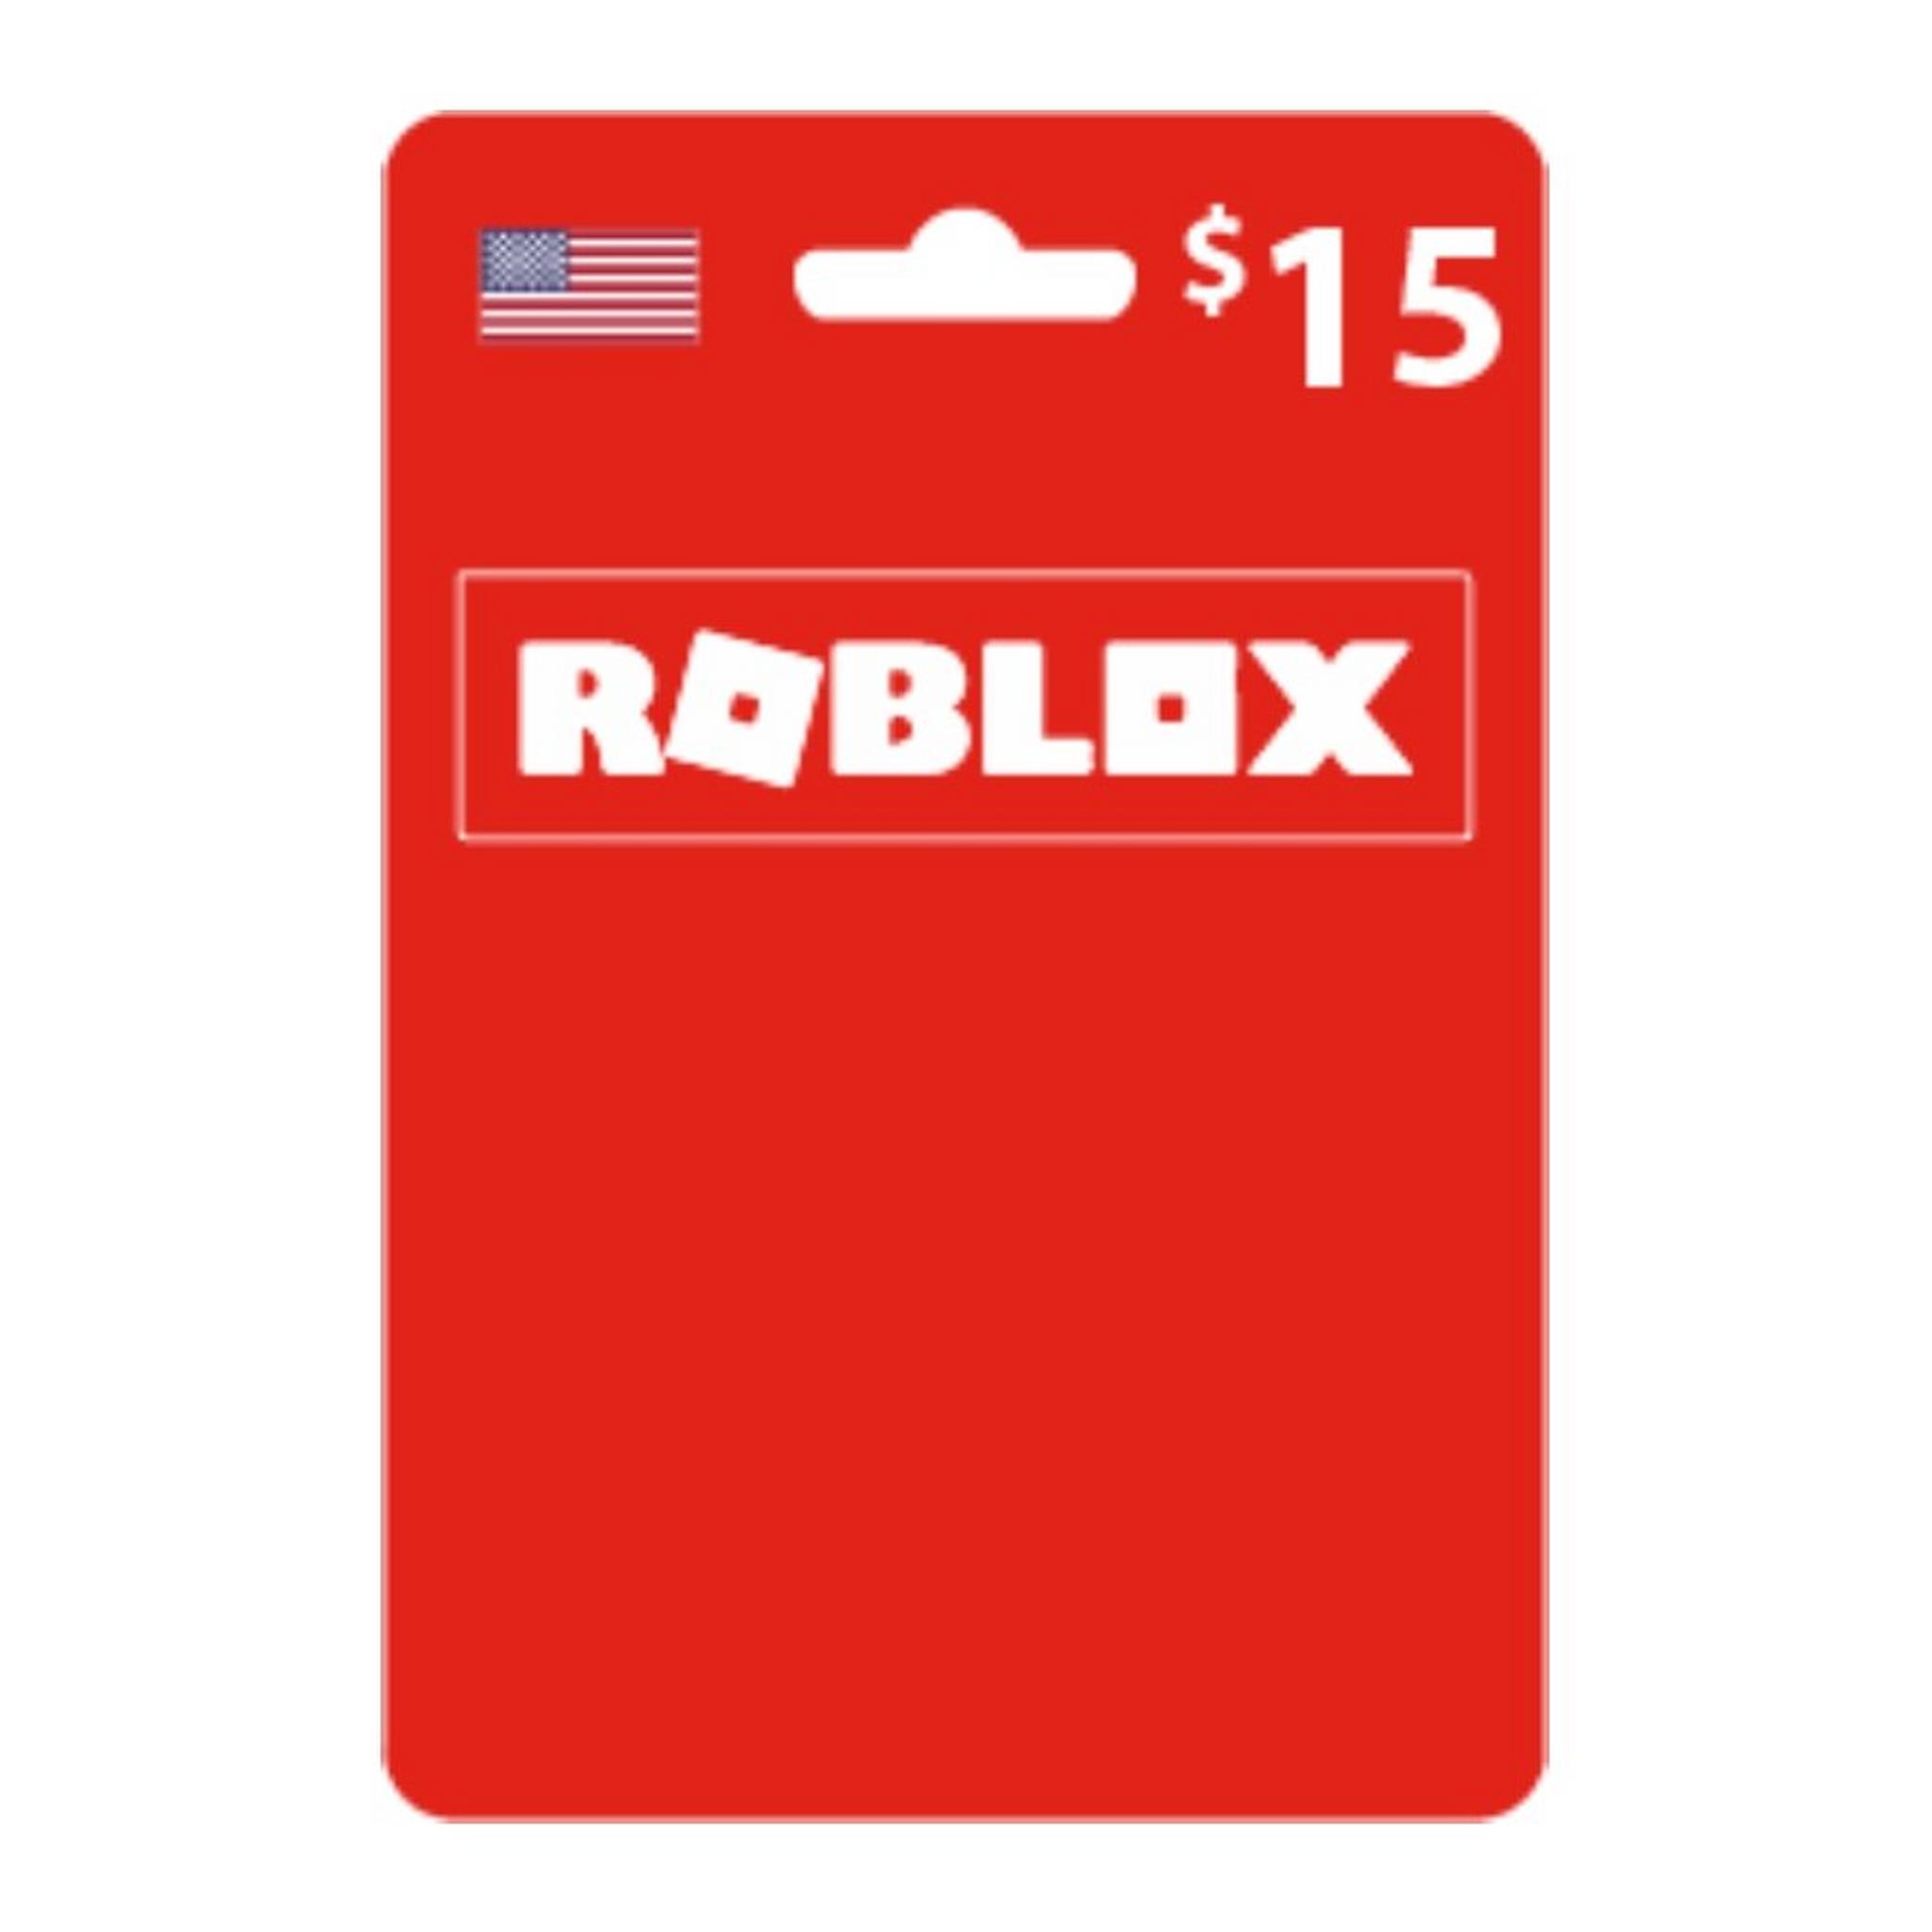 Roblox Card $15 - Us Store